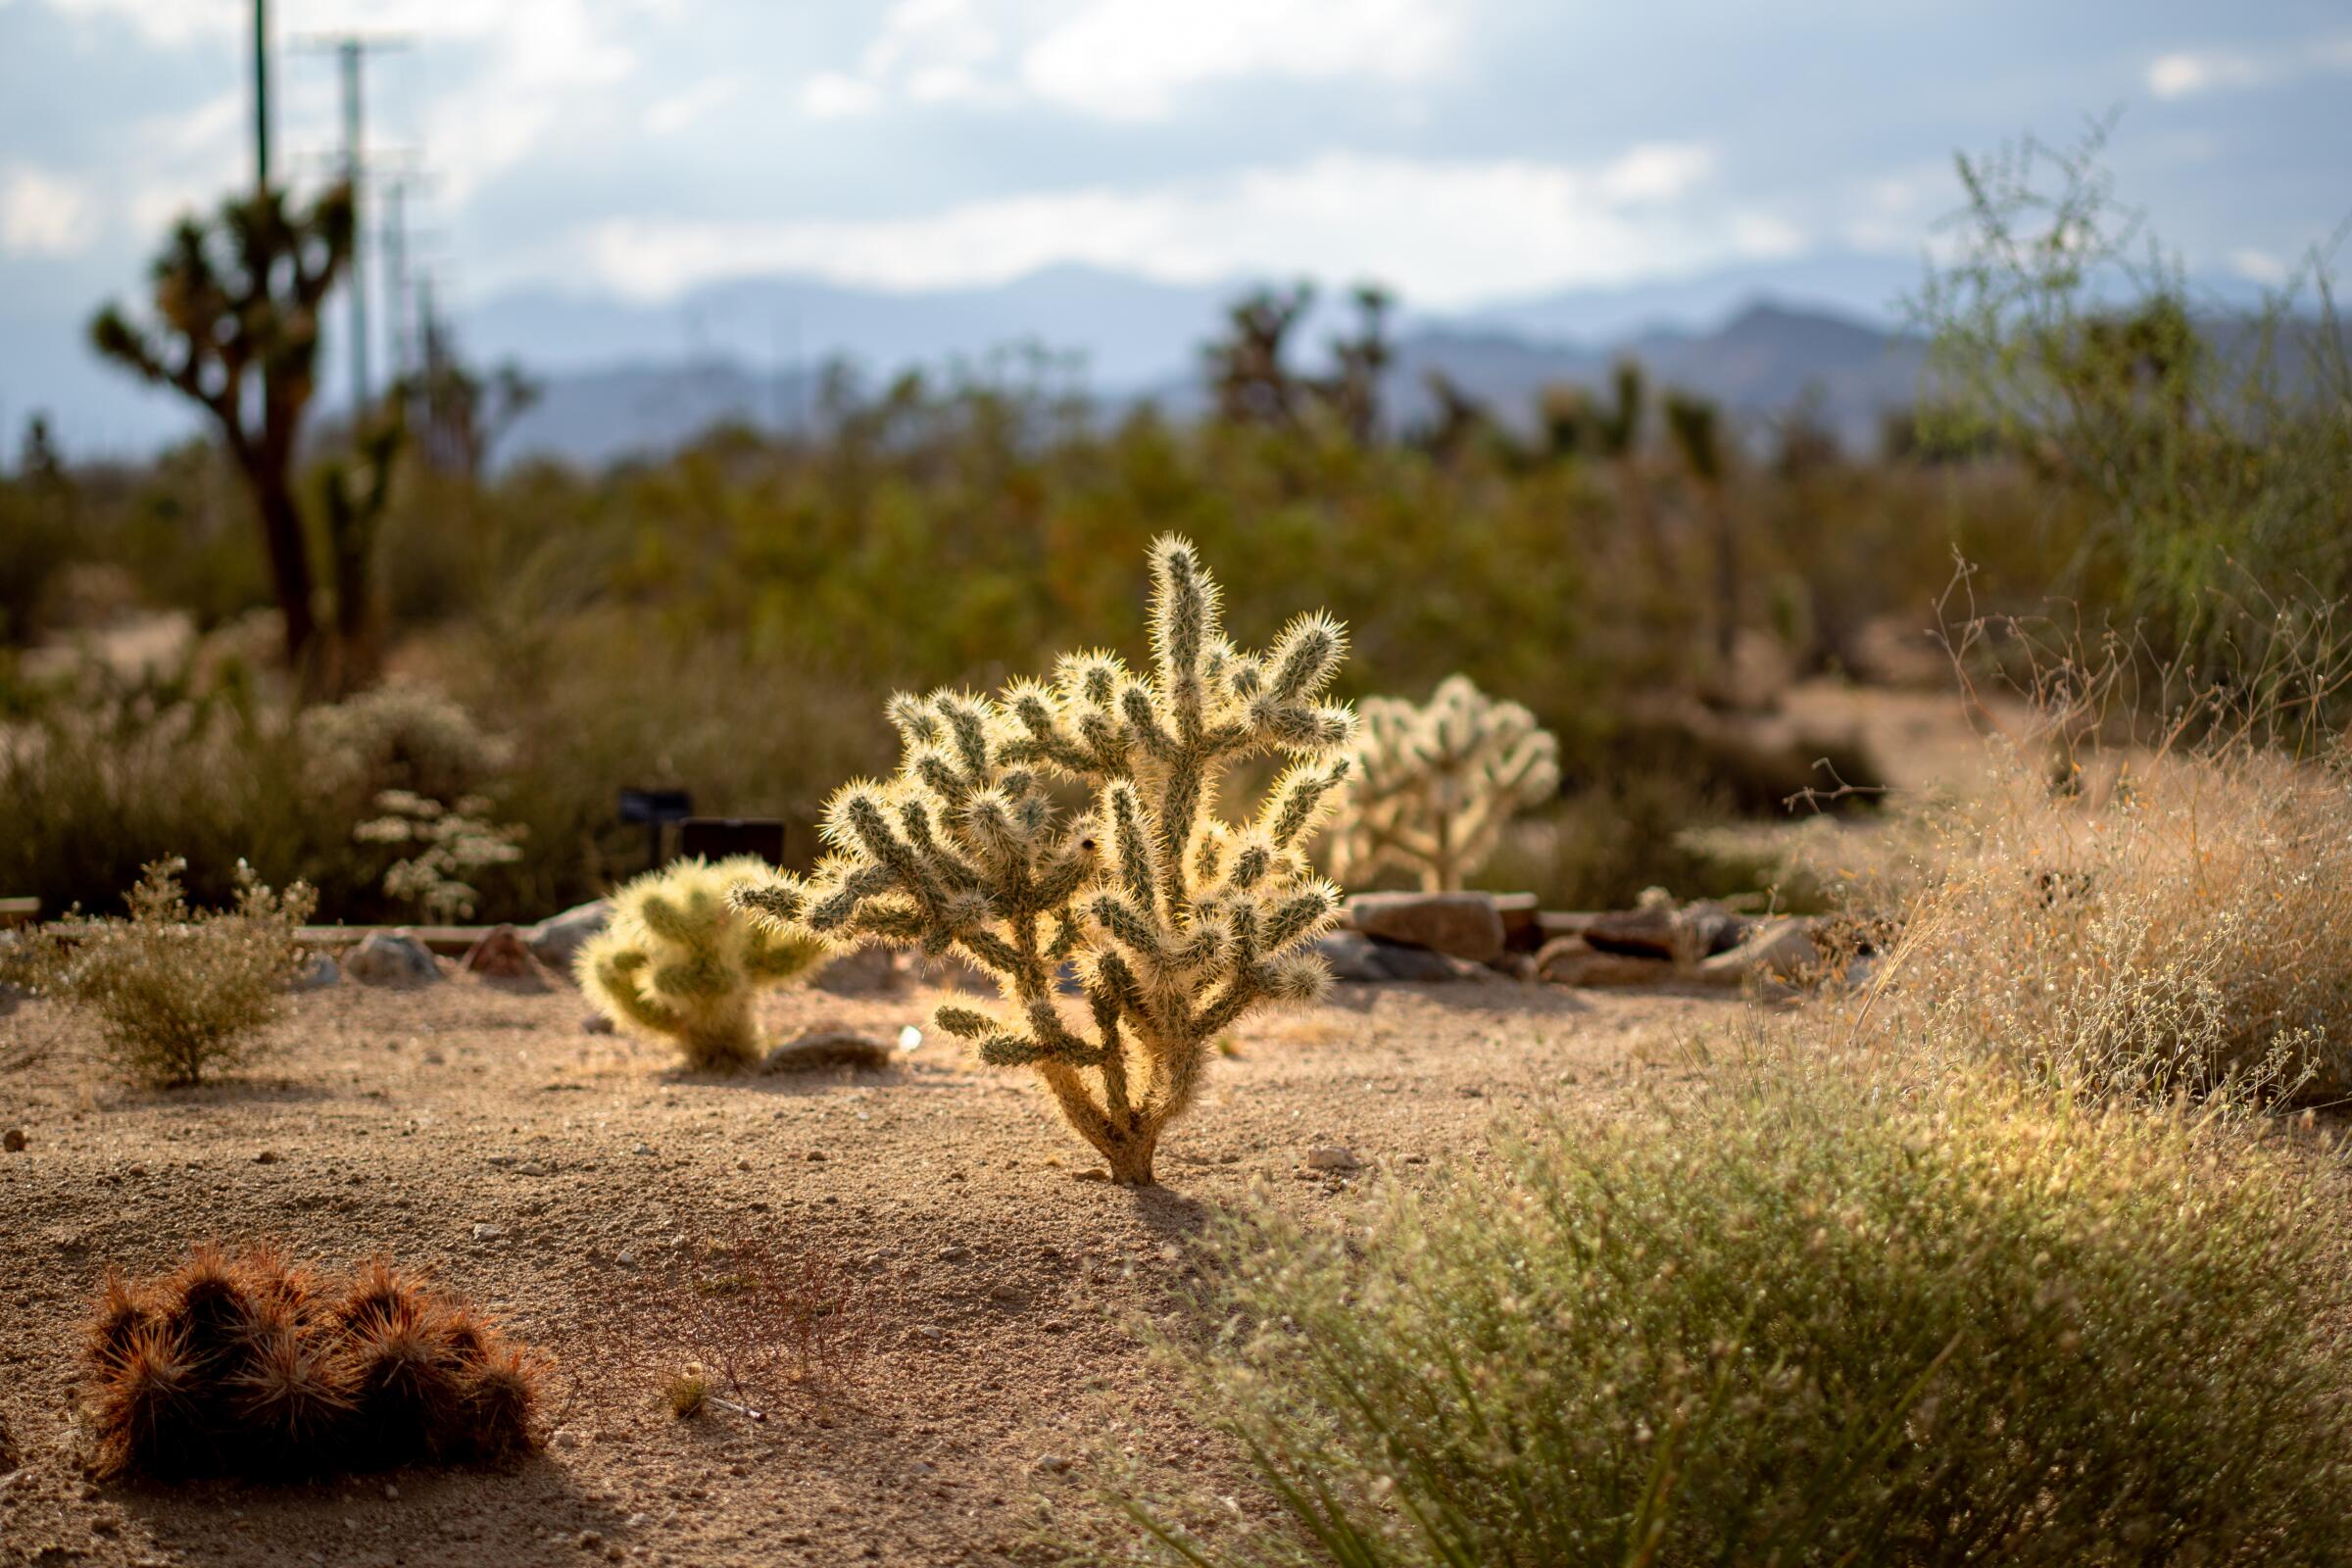 Silver cholla cactus glows in the late afternoon light at the Mojave Desert Land Trust's garden in Joshua Tree.